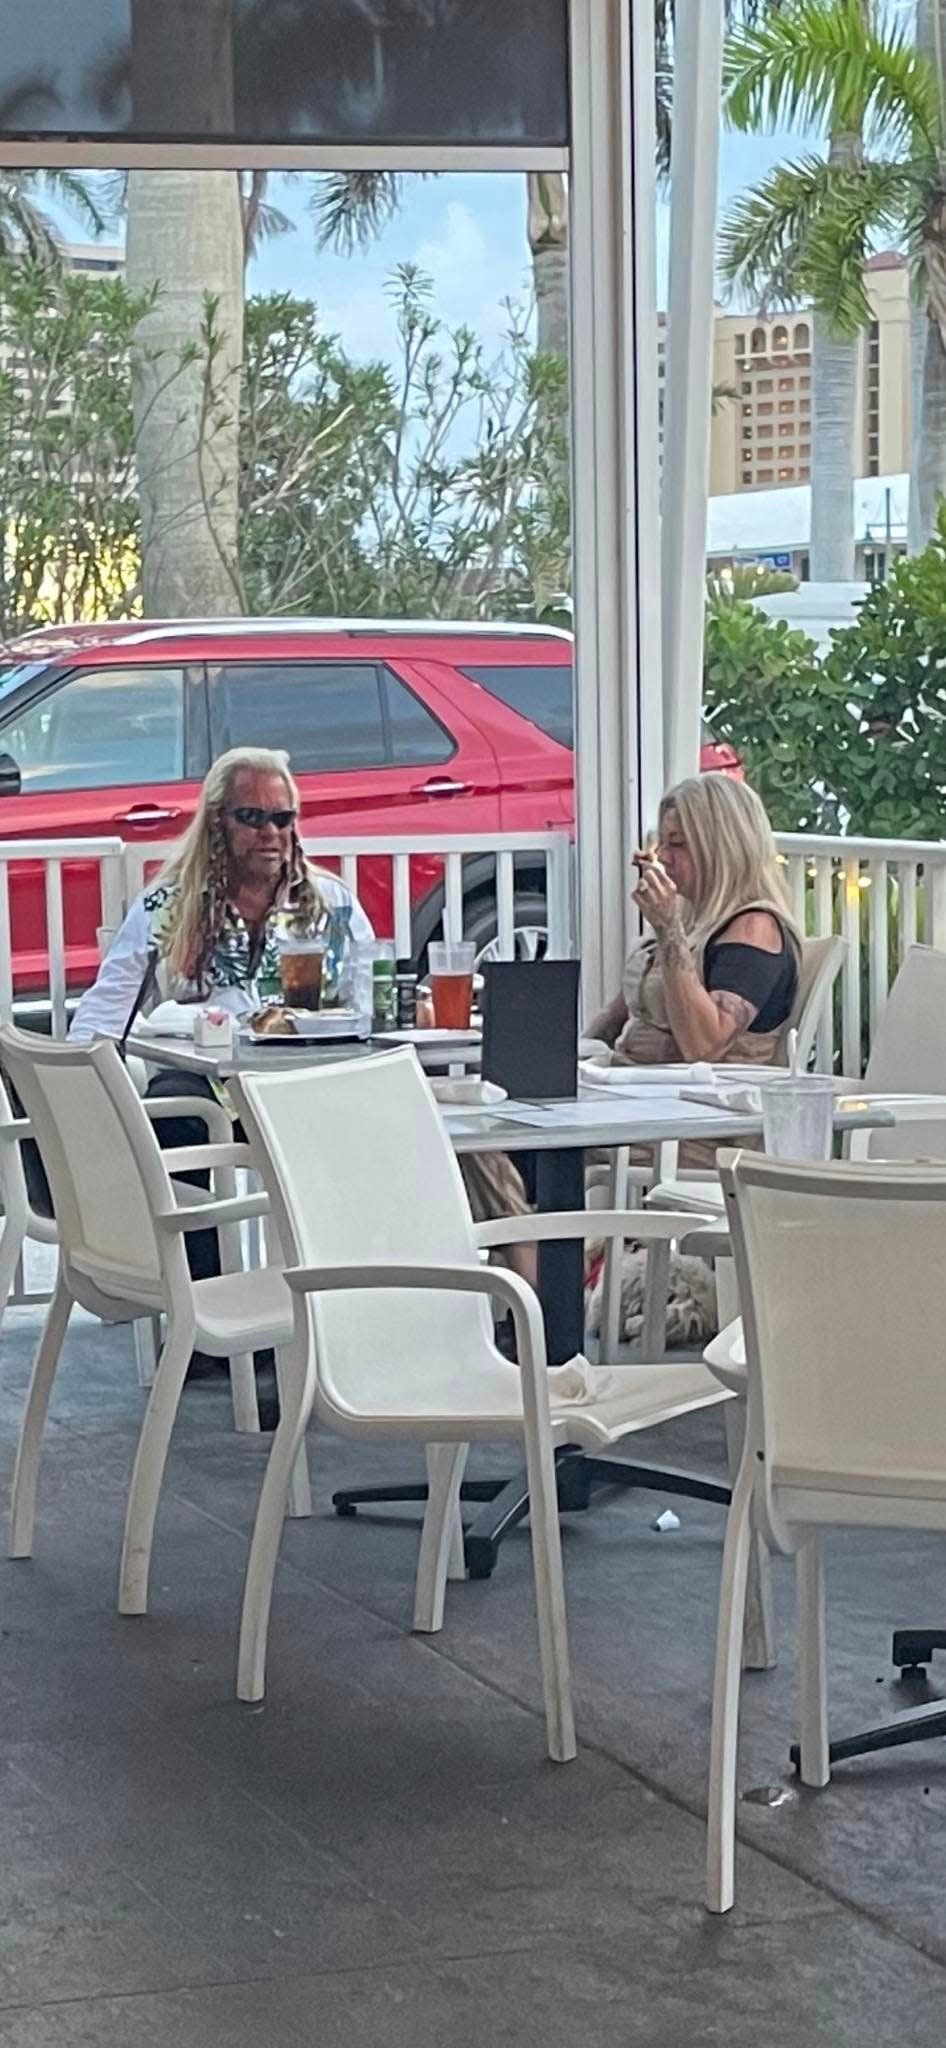 As the weekend winds down, Duane "Dog the Bounty Hunter" Chapman and wife, Francie, enjoy a meal at one of their favorite Marco Island spots, Sami's Pizza and Grill.